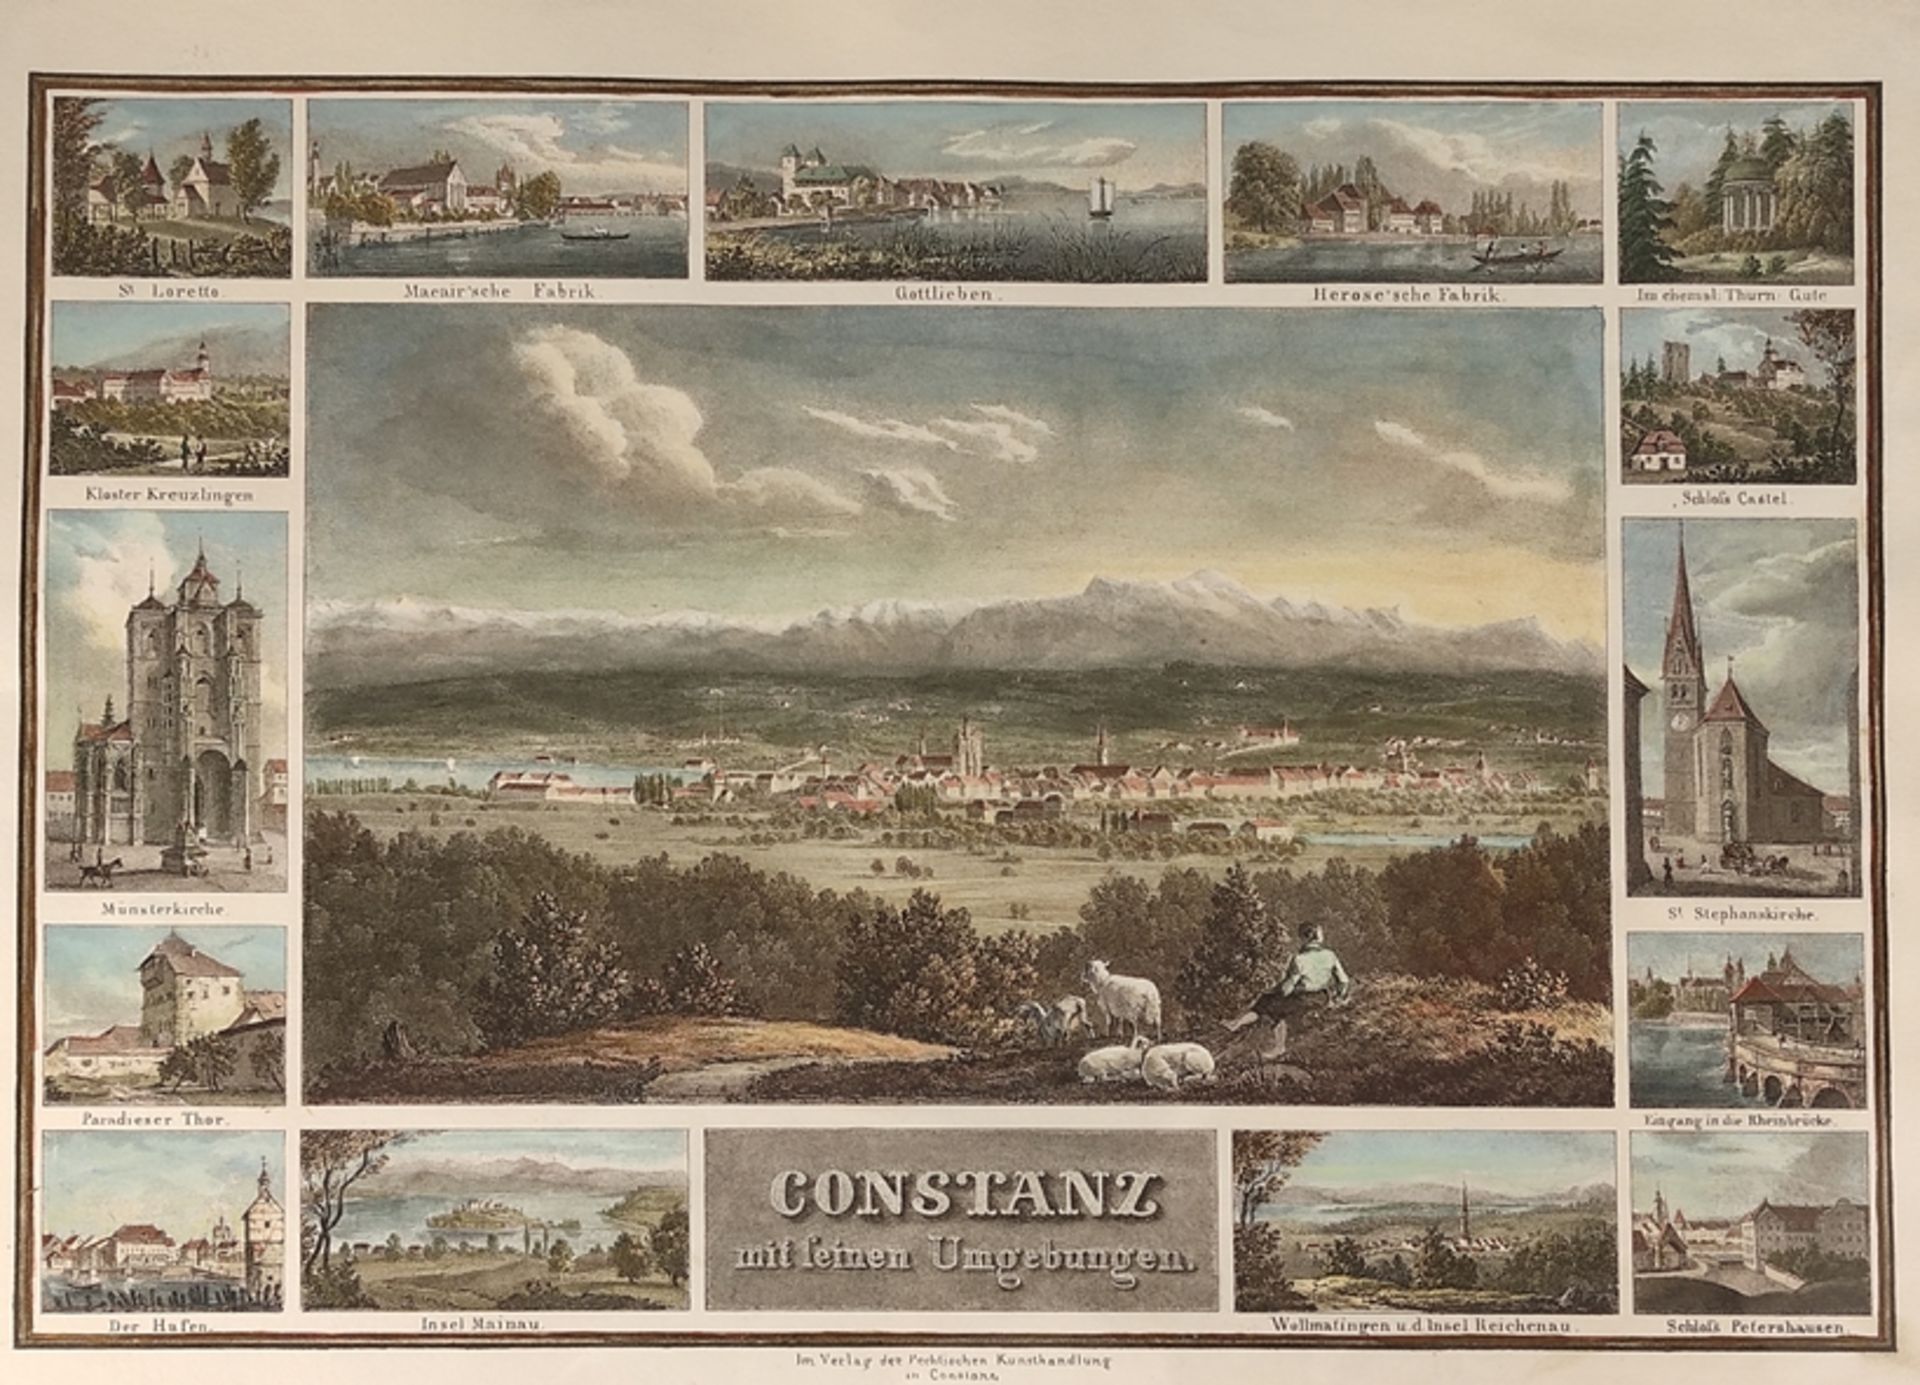 Souvenir sheet (19th century) "Constance" with 15 small views of Constance and surroundings, (St. L